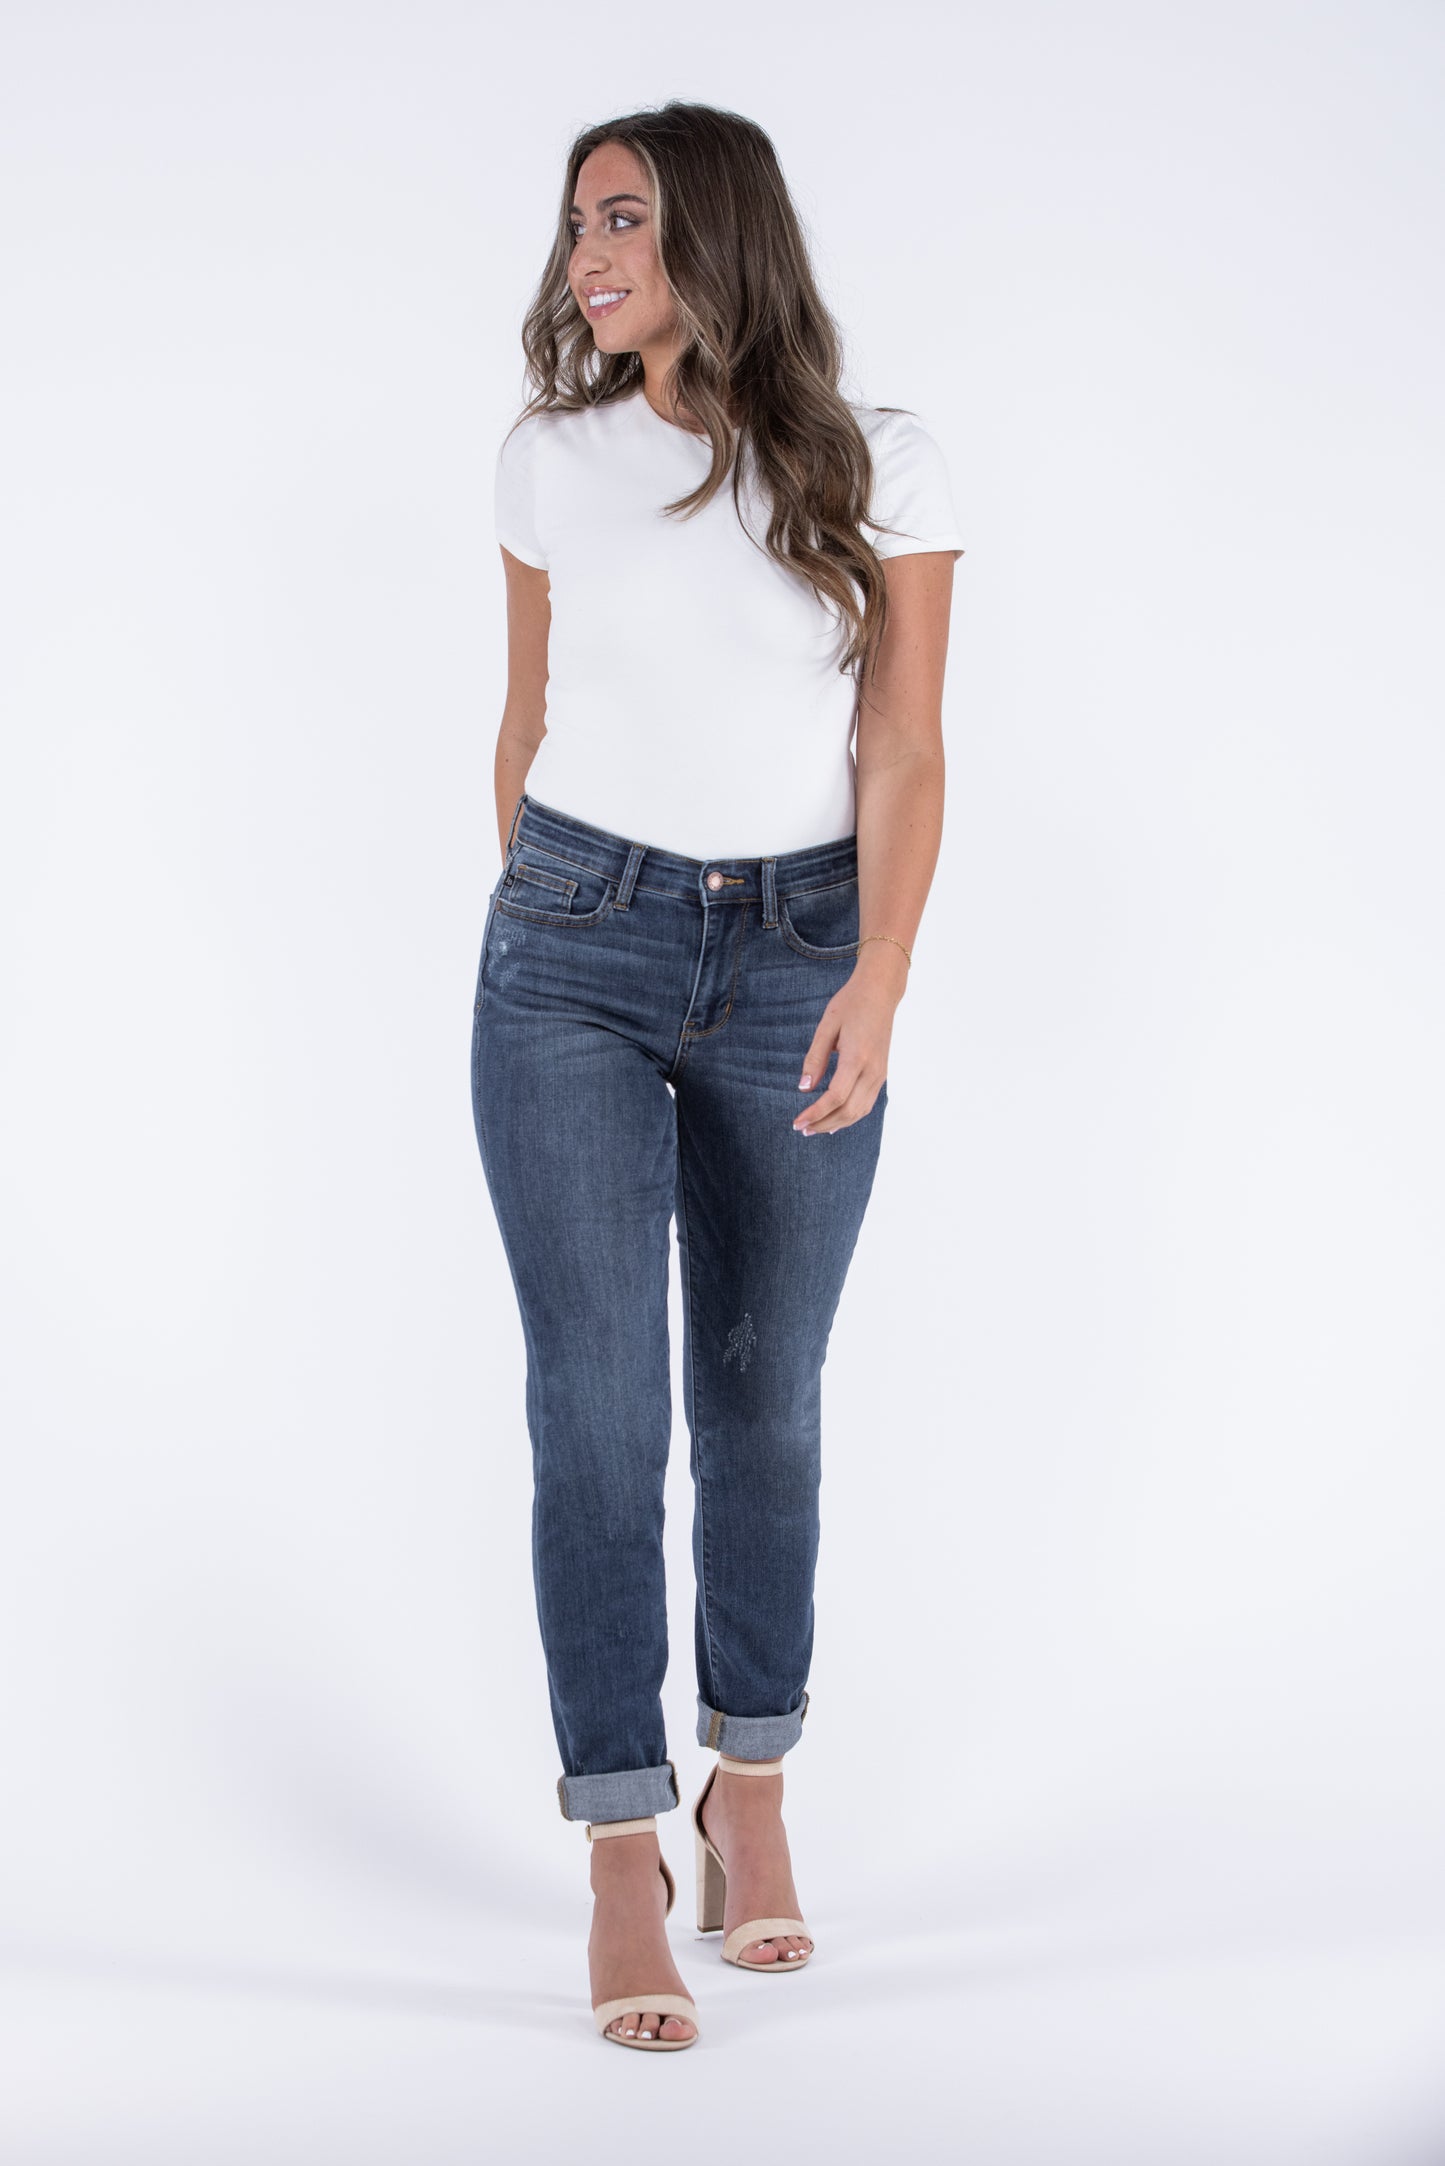 *Three Length* Judy Blue One Step At A Time Mid-Rise Relaxed Denim